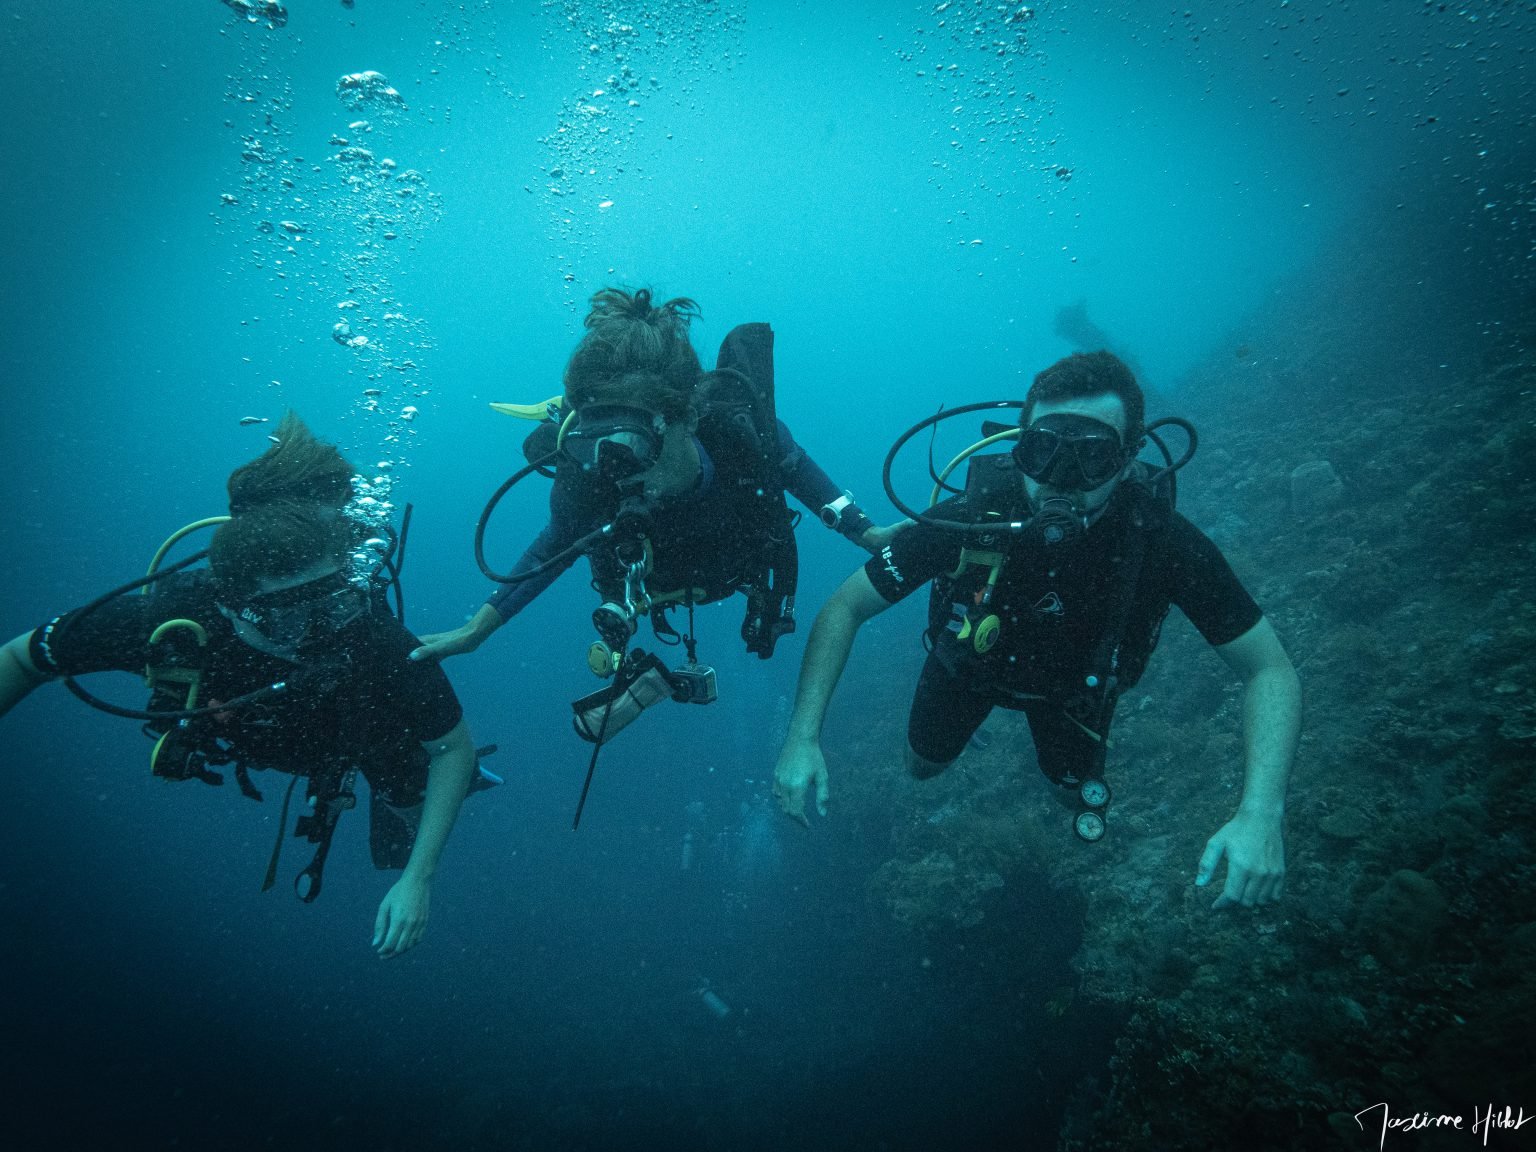 Wide-angle photograph by Maxime Hiblot, captured at the USAT Liberty wreck dive site in Amed, Bali, featuring a PADI instructor ensuring the safety of two beginner divers during a Discover Scuba Diving (DSD) experience. The instructor's professionalism and the awe of the novice divers are palpable.